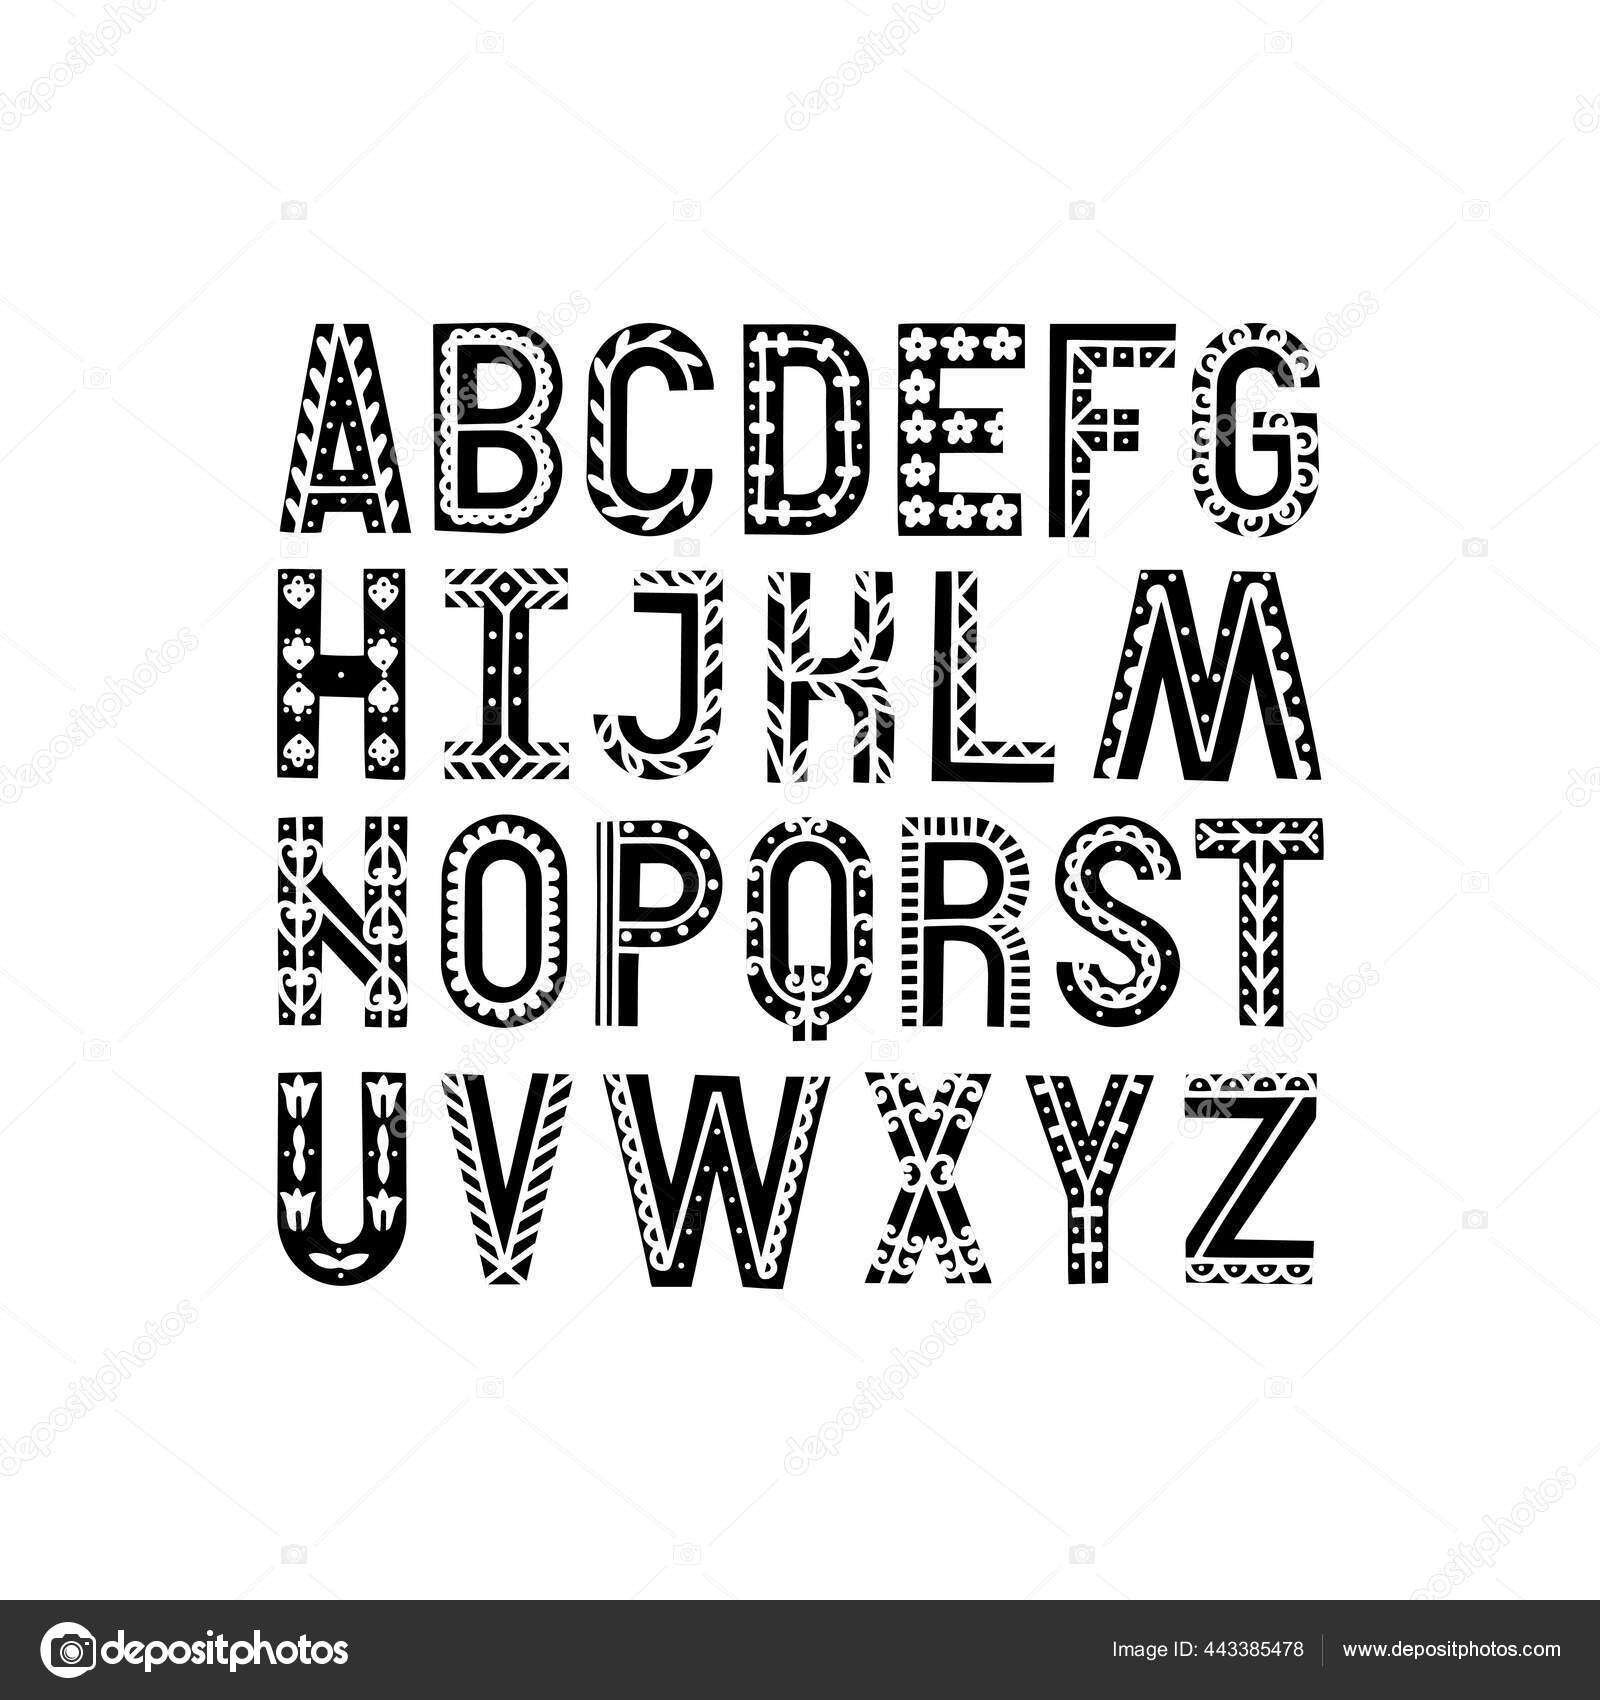 Vector Latin Stamp Font. Vector Stamp Abc with Grunge Texture